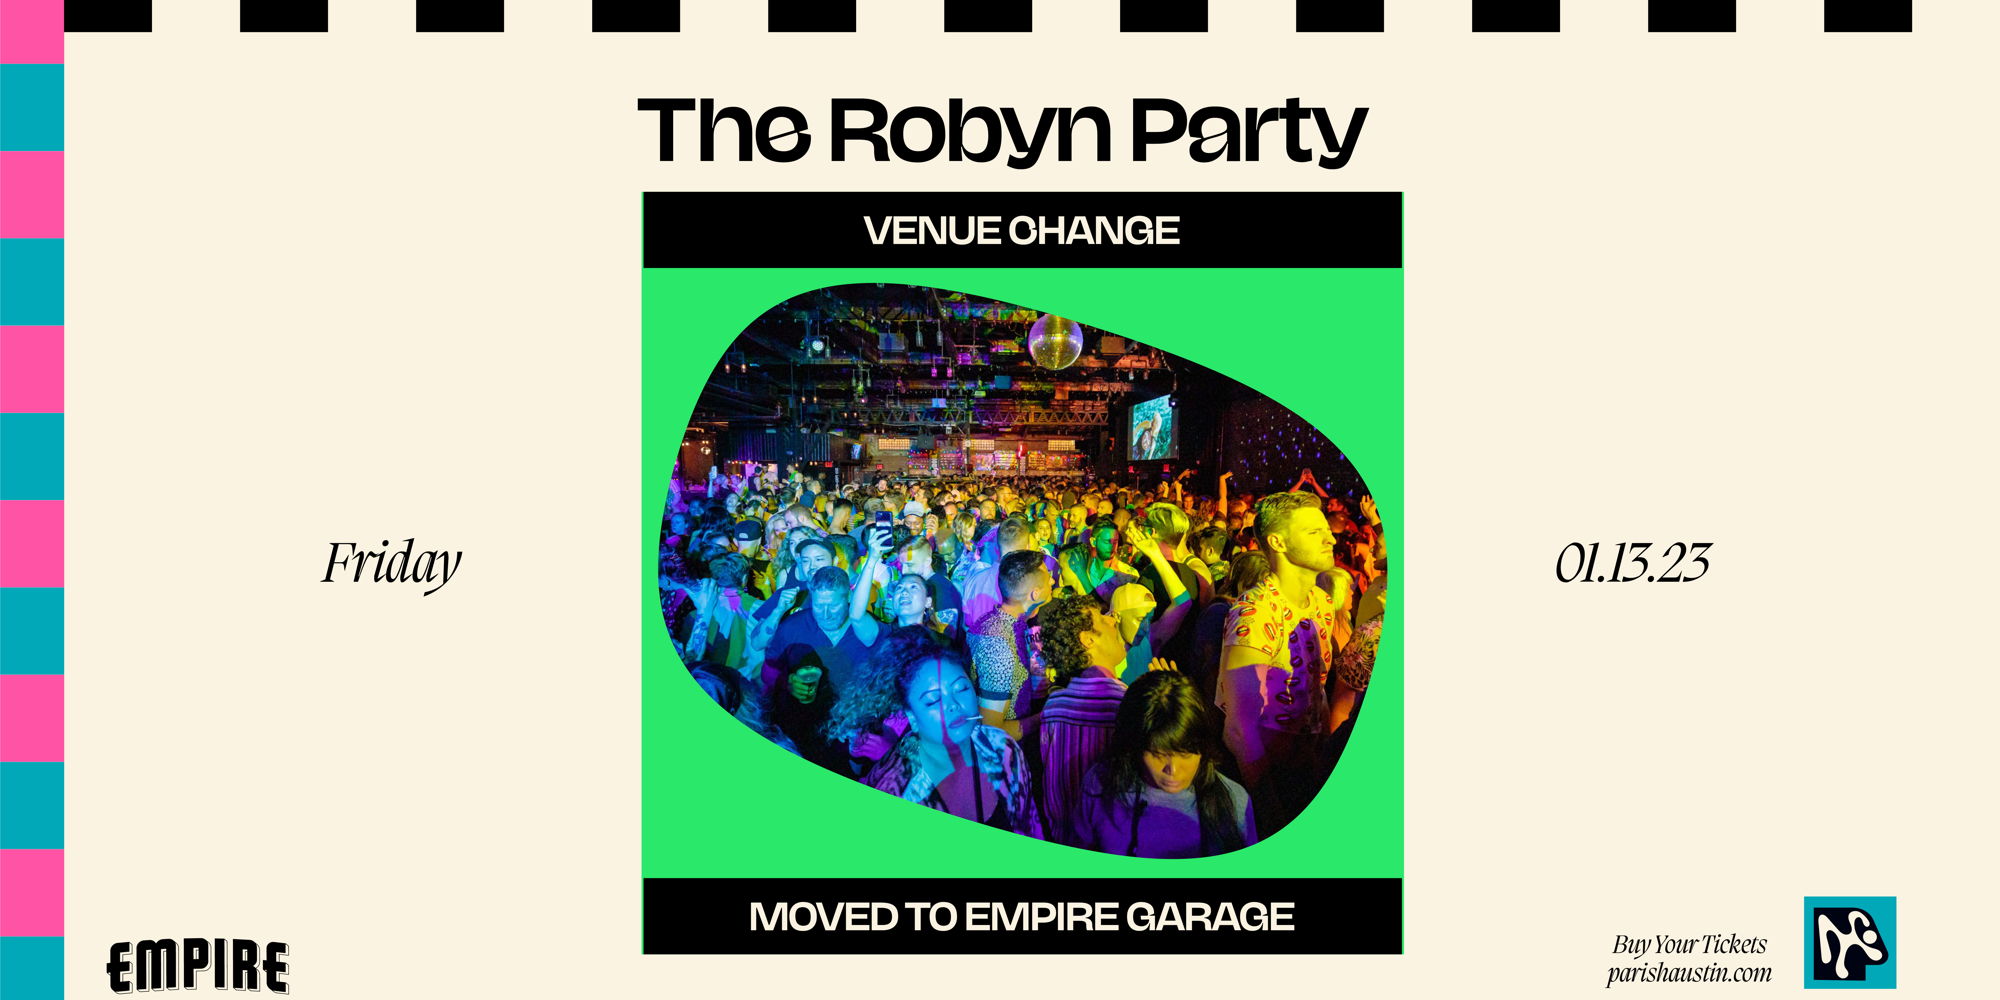 Empire Presents: The Robyn Party at Empire on 1/13/23 promotional image